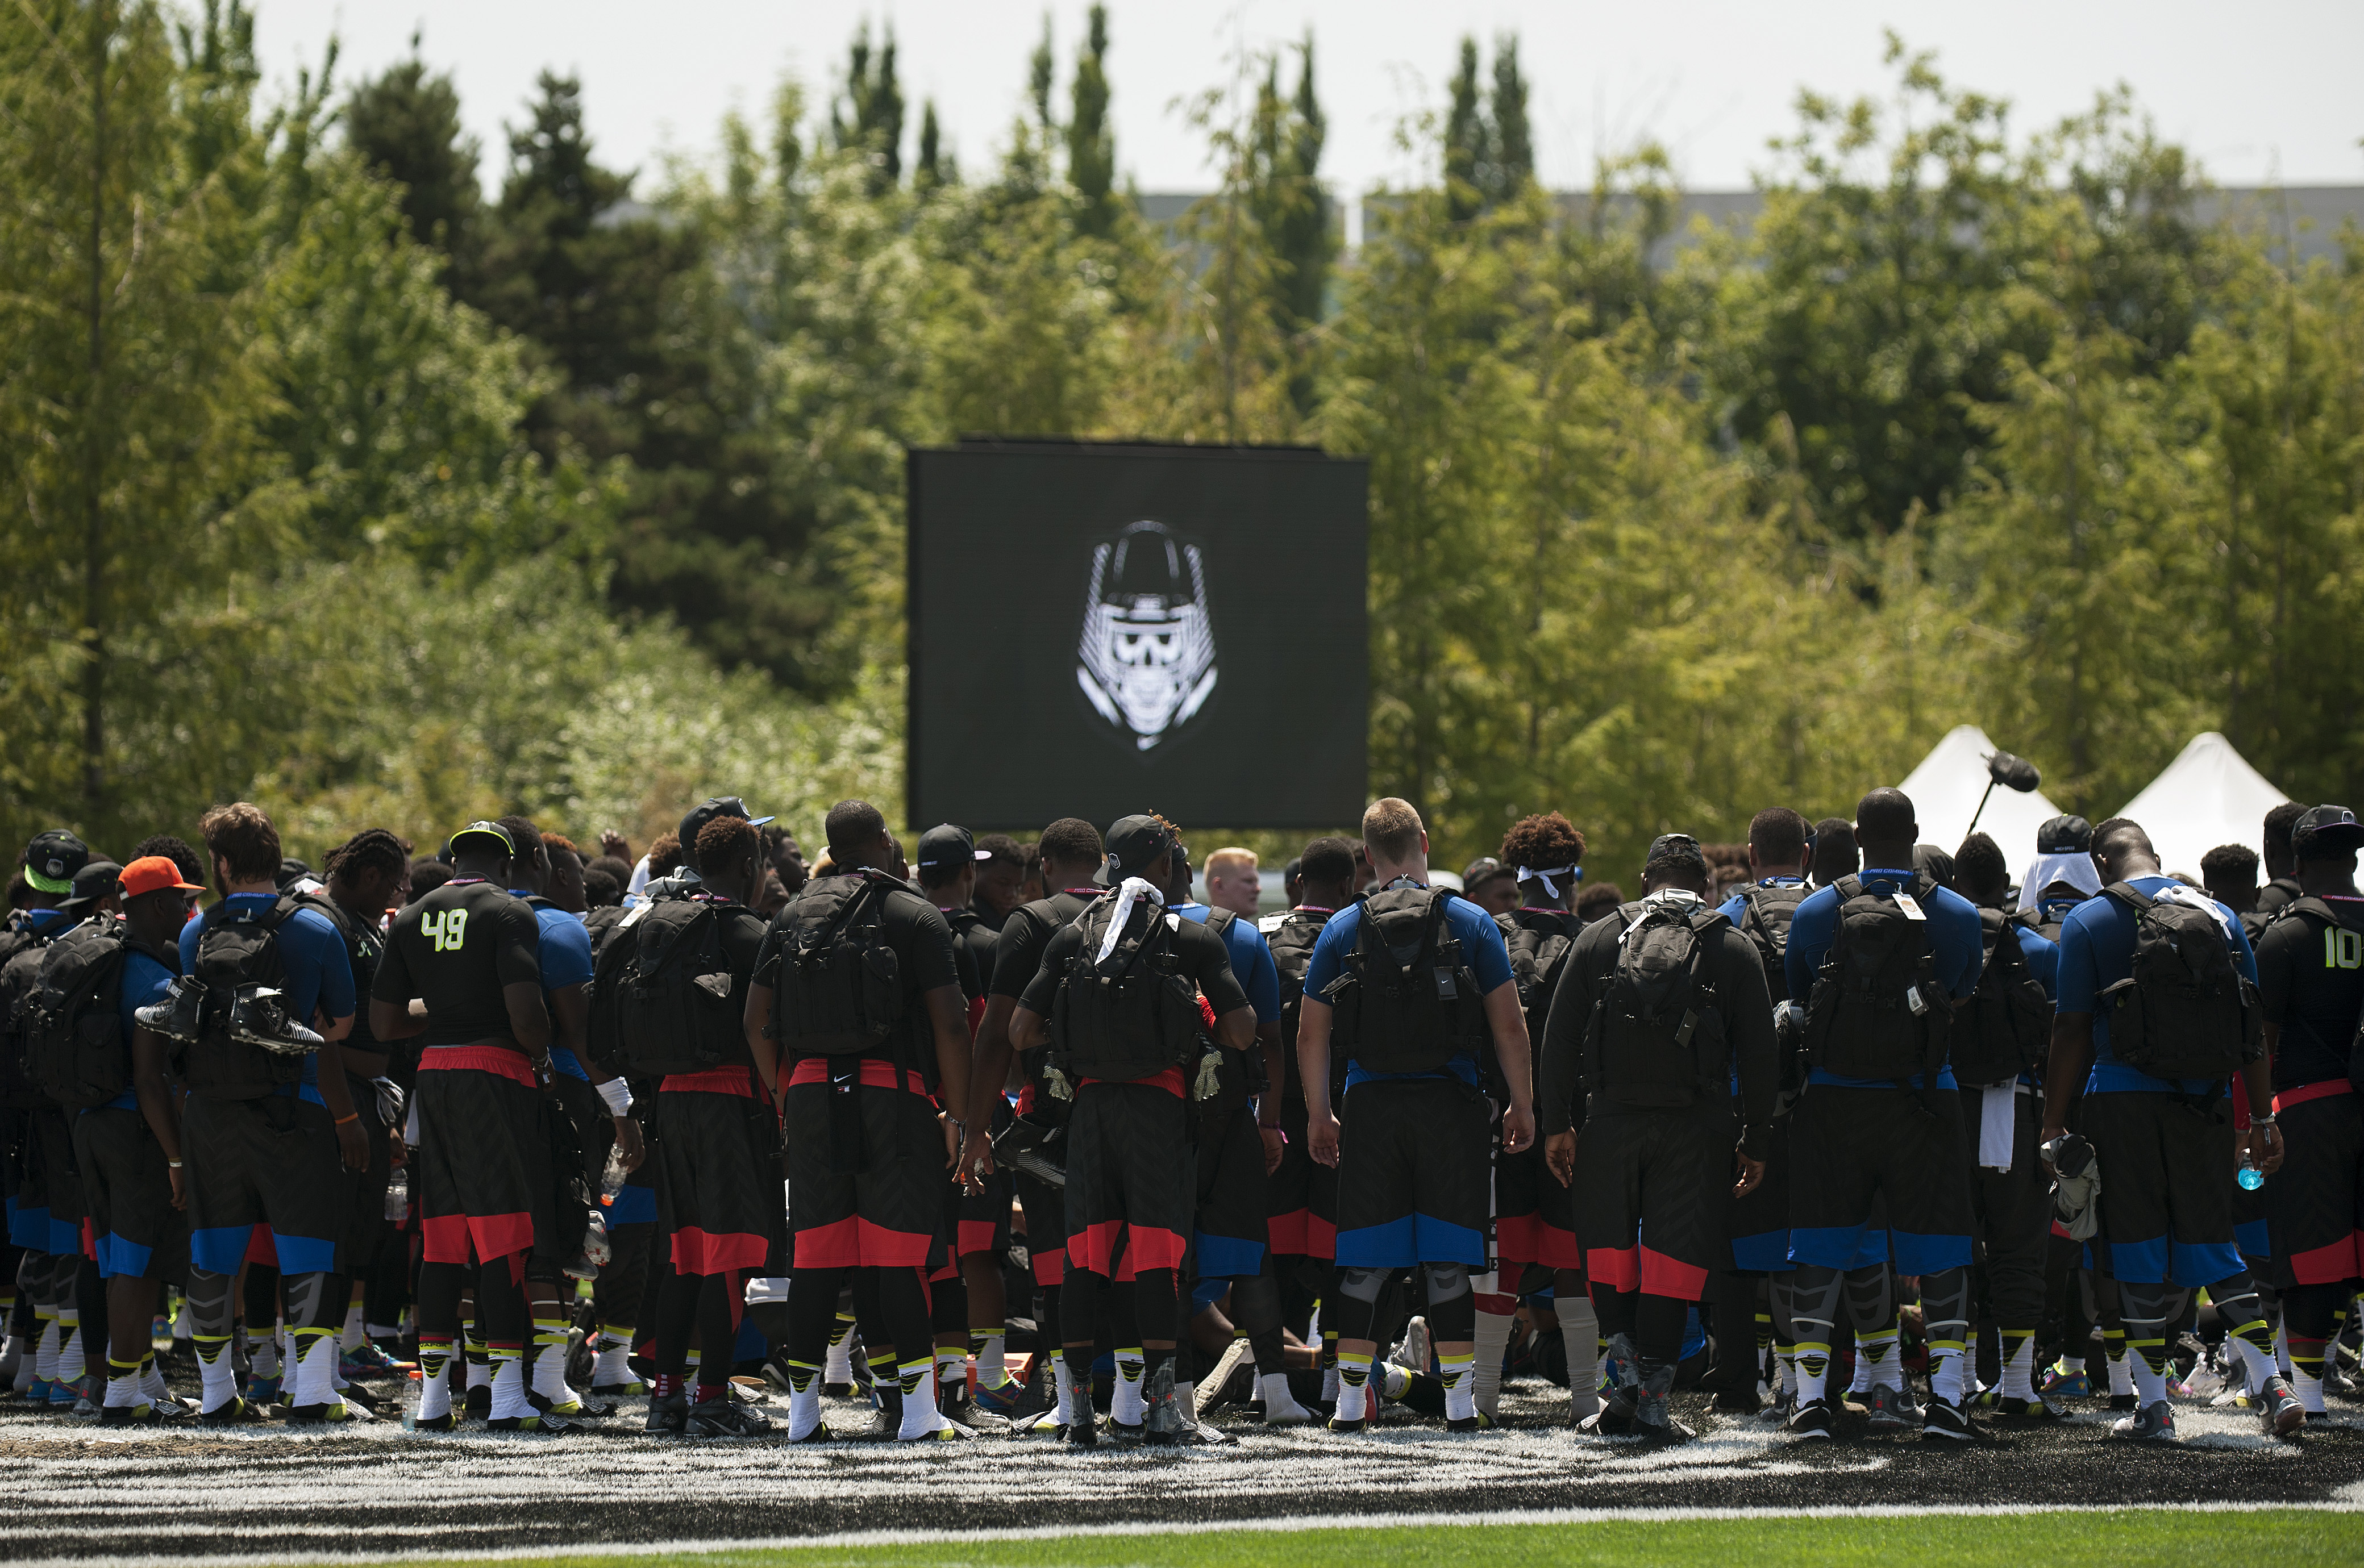 Players huddle up after a session of The Opening last summer in Oregon (Photo: by Godofredo Vasquez, USA TODAY Sports)